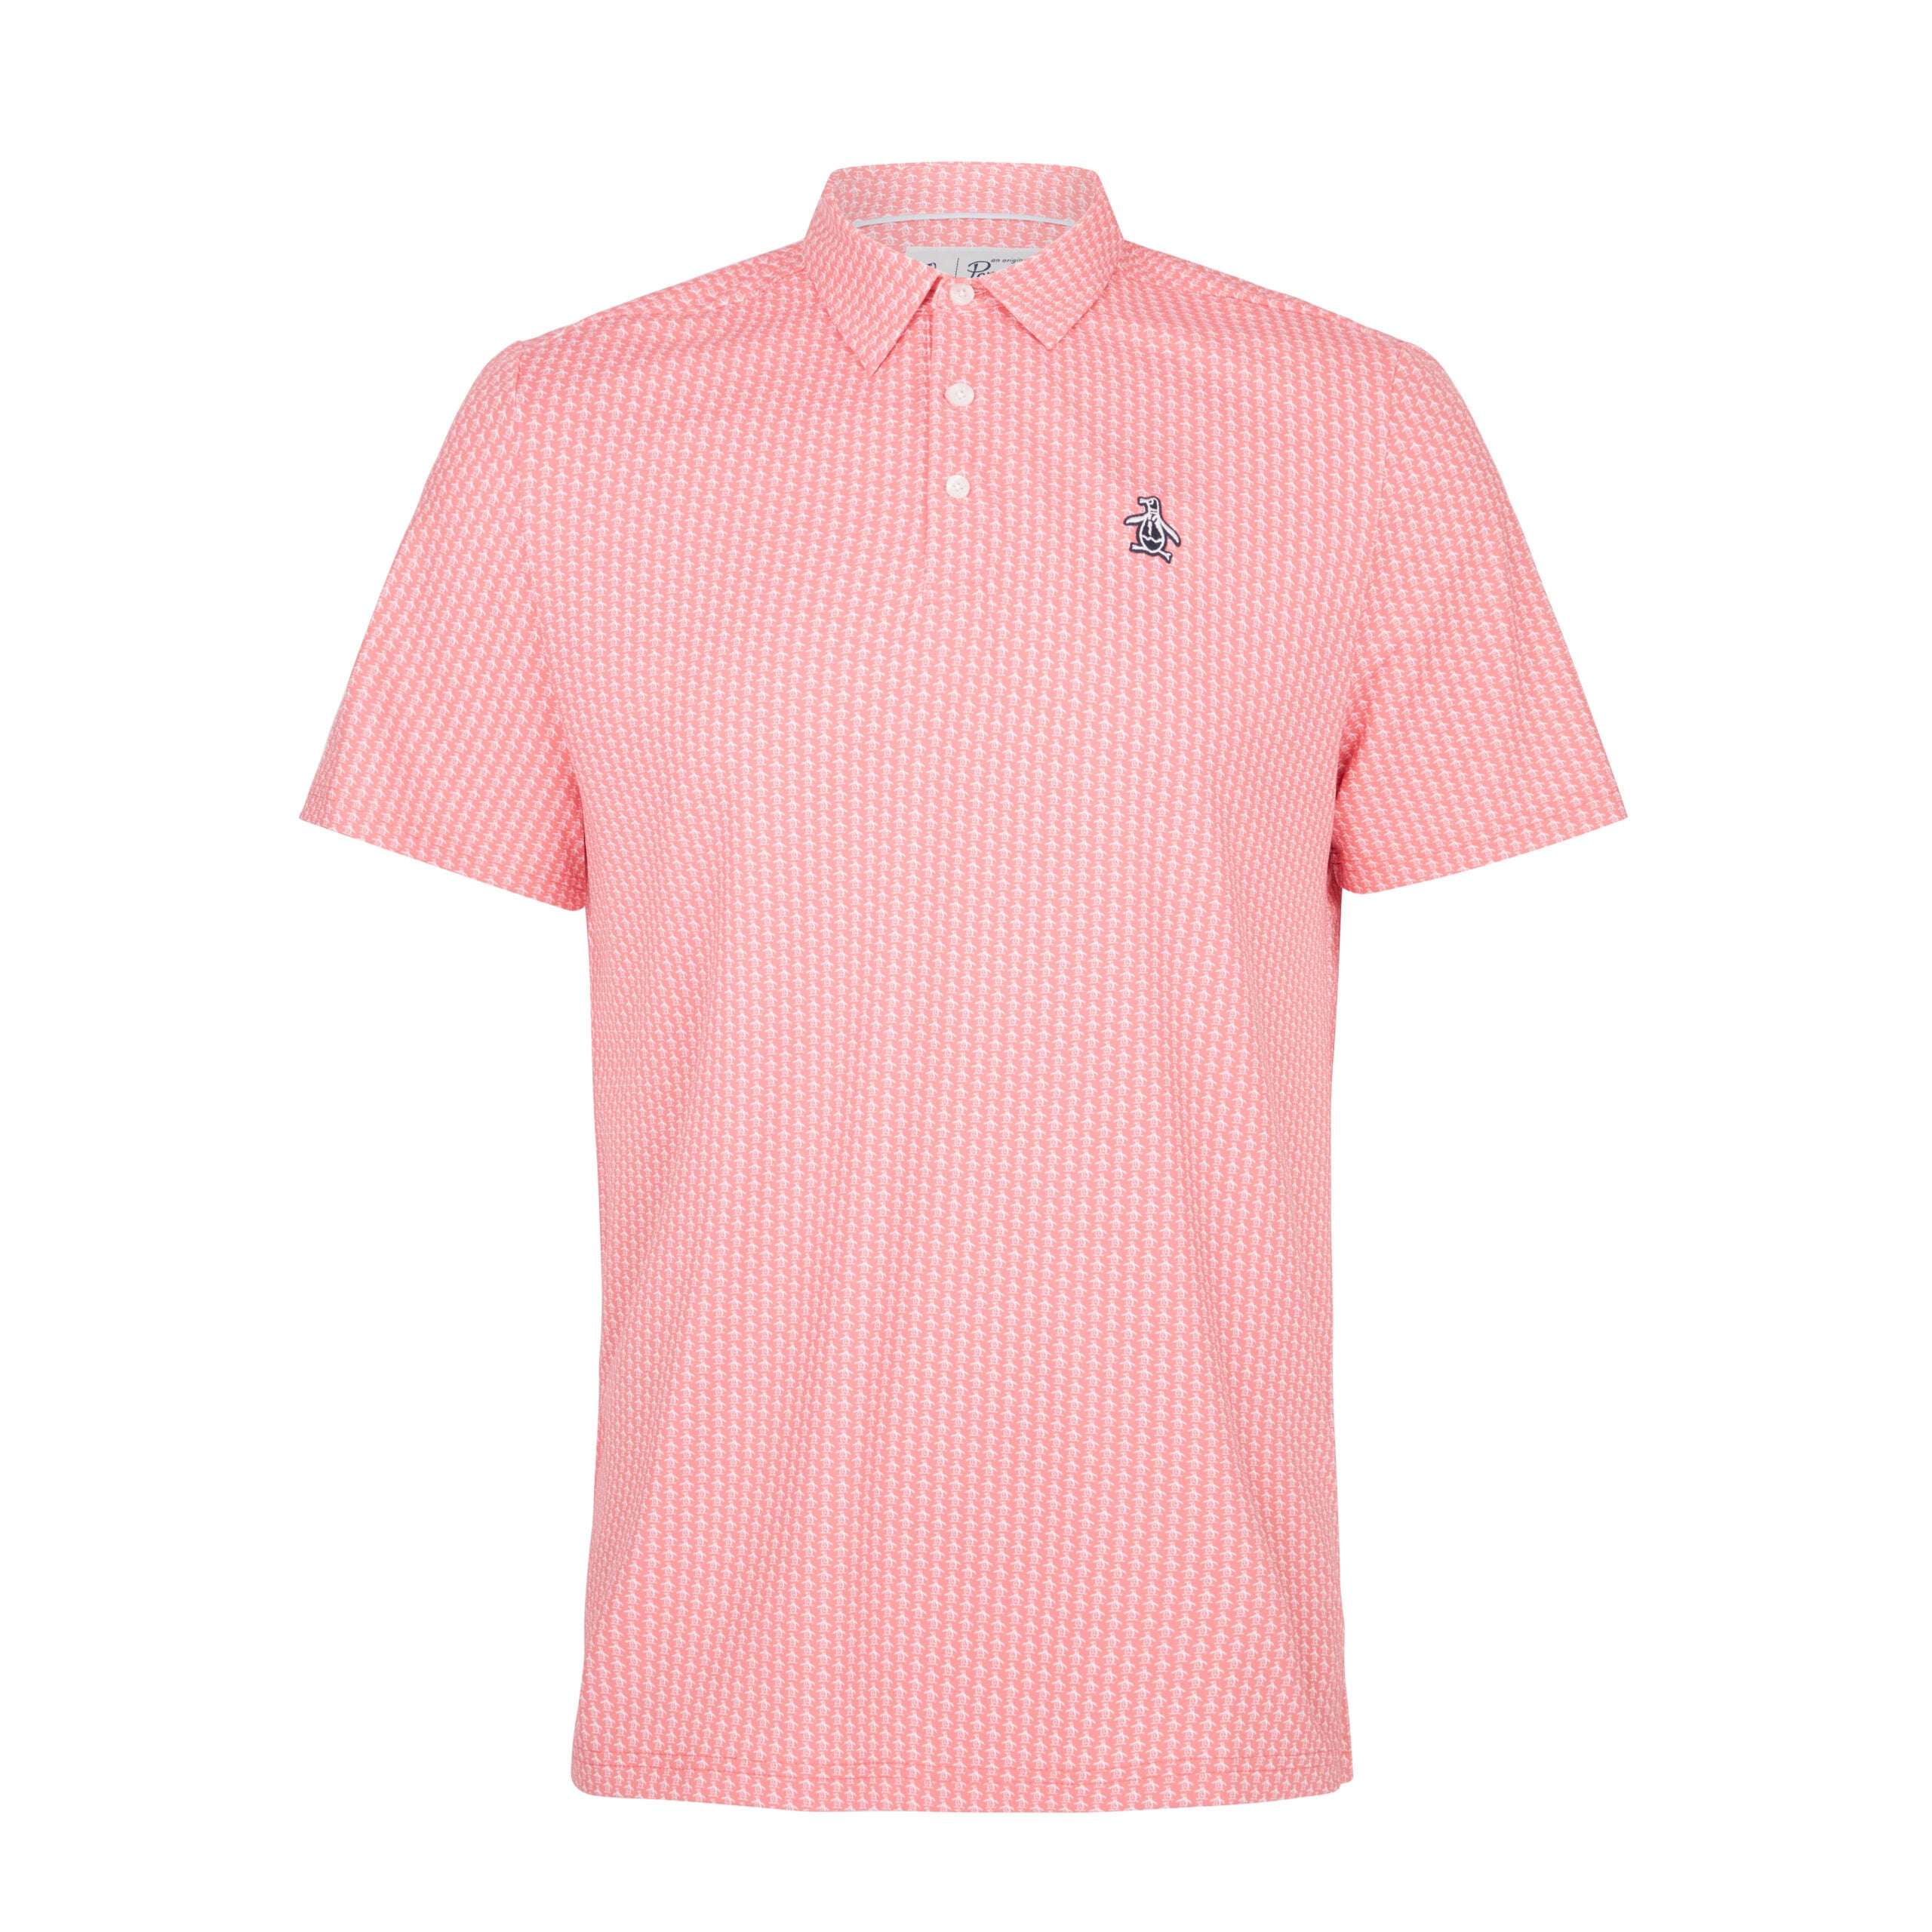 View AllOver Pete Print Golf Polo Shirt In Strawberry Pink information